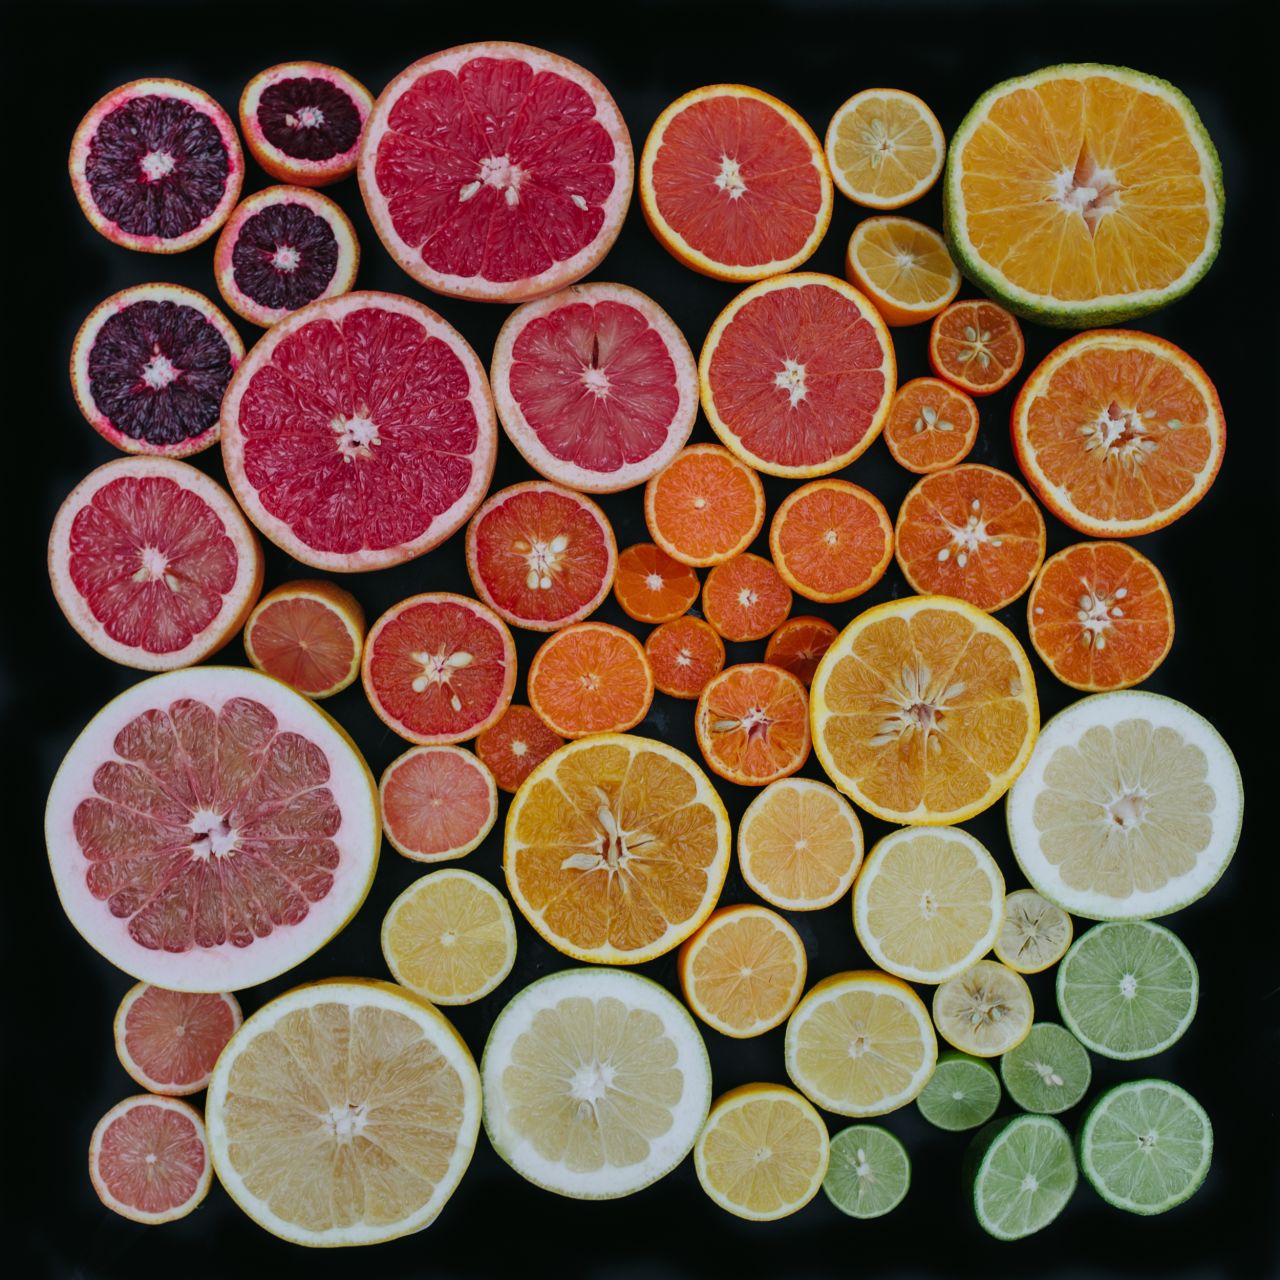 The fruits used for this popular image of sliced citrus fruits yielded two gallons of juice.